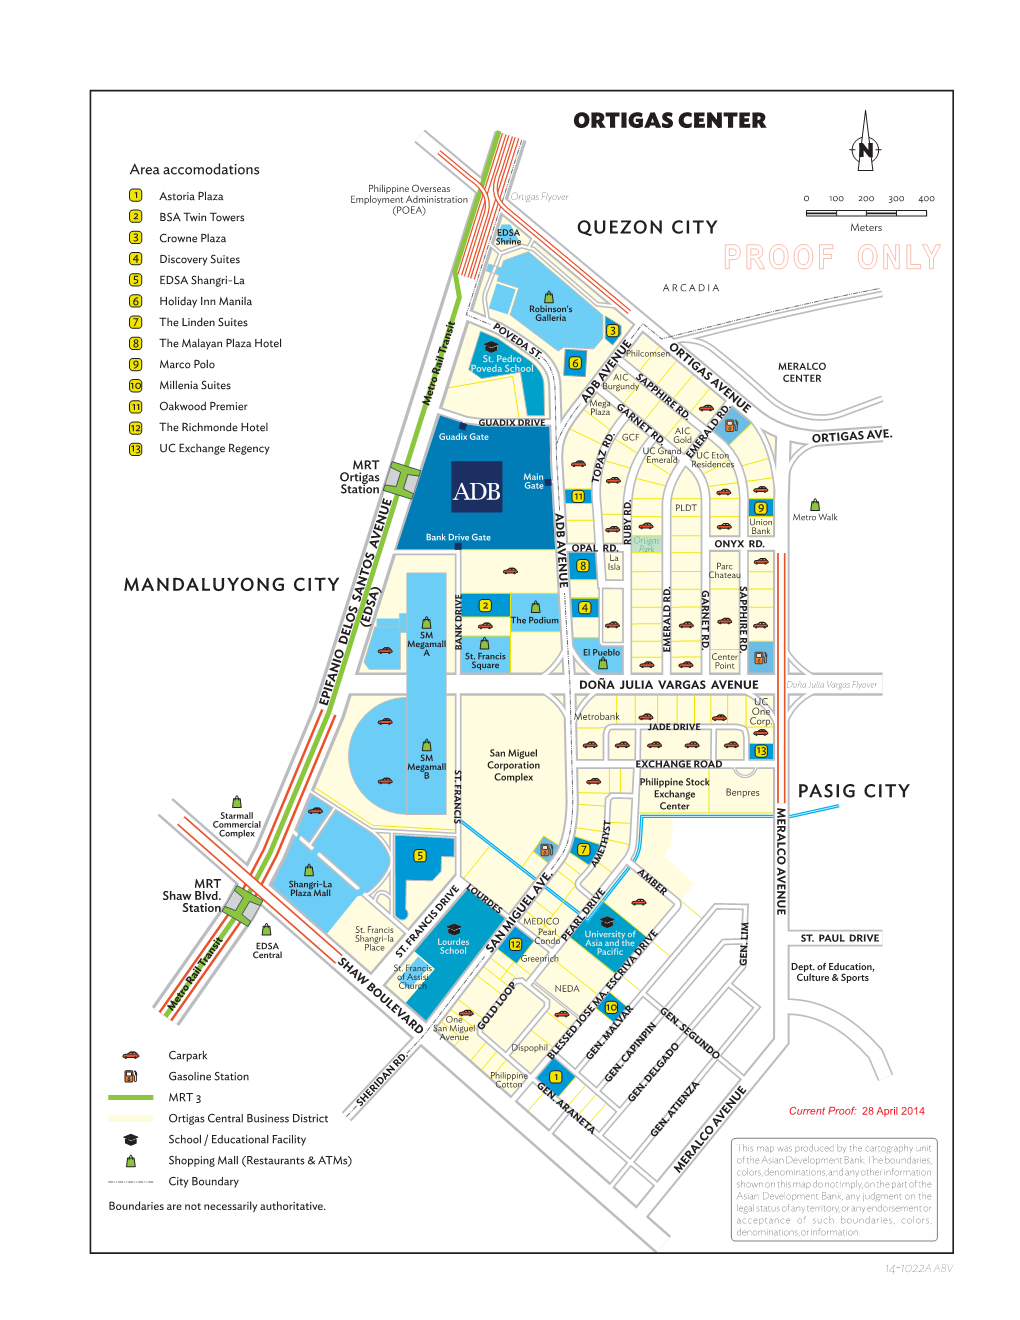 ADB Vicinity Map and Ortigas Hotels Contact Information